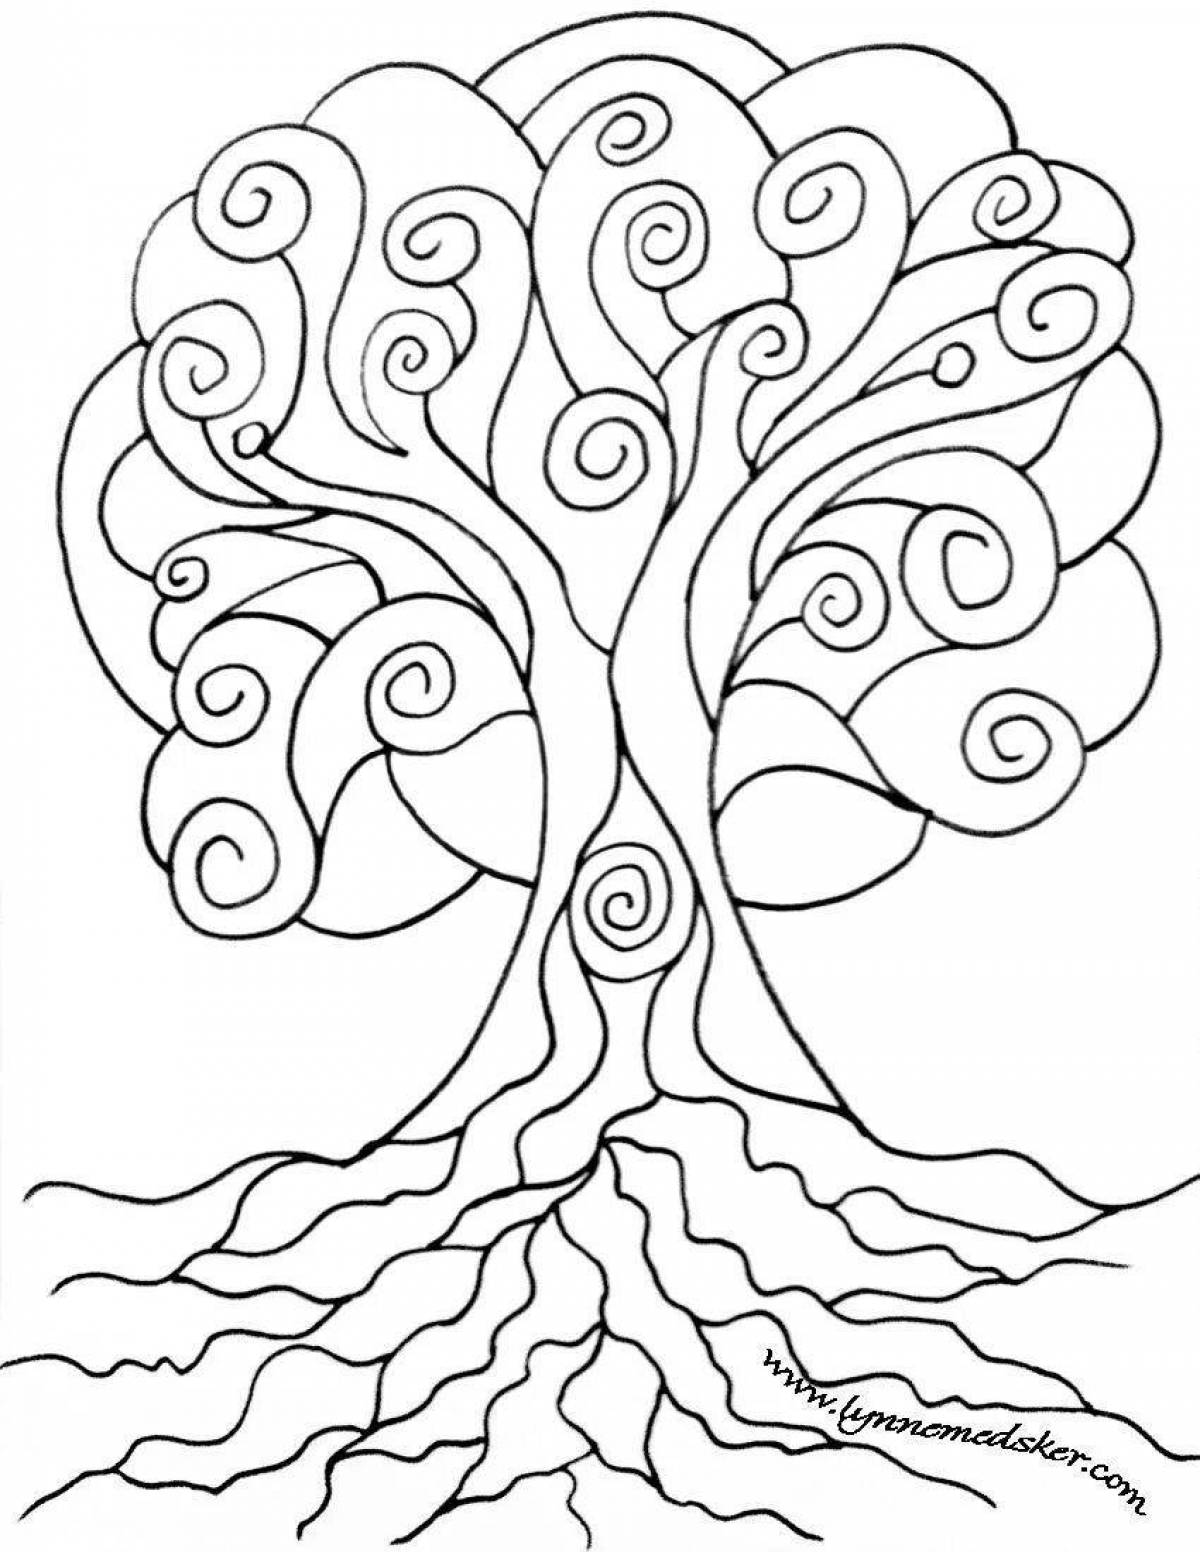 Charming tree of life coloring book